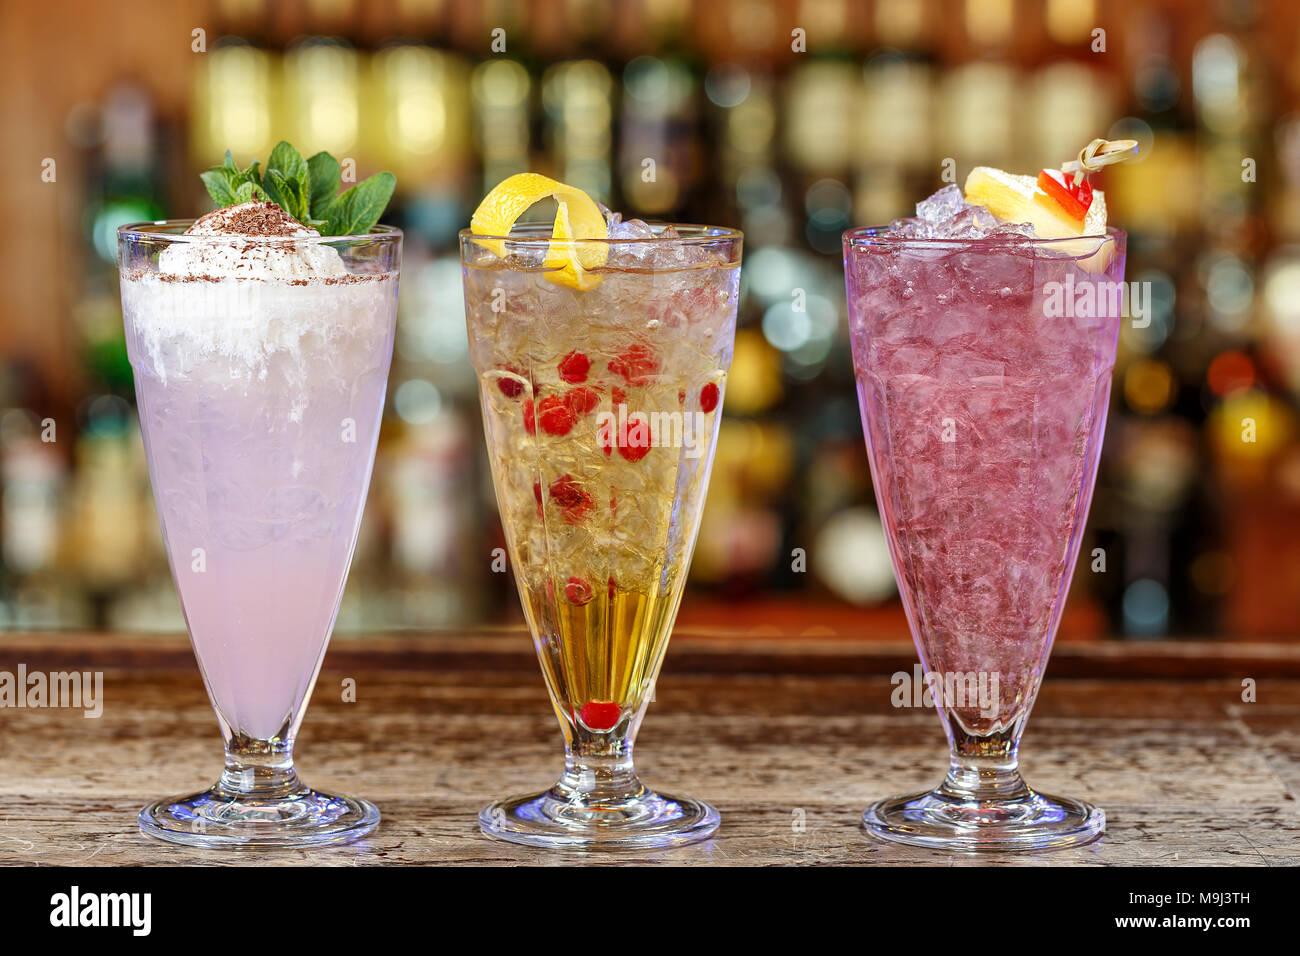 https://c8.alamy.com/comp/M9J3TH/summer-cocktail-menu-cocktails-stand-in-a-row-on-the-bar-space-for-text-M9J3TH.jpg